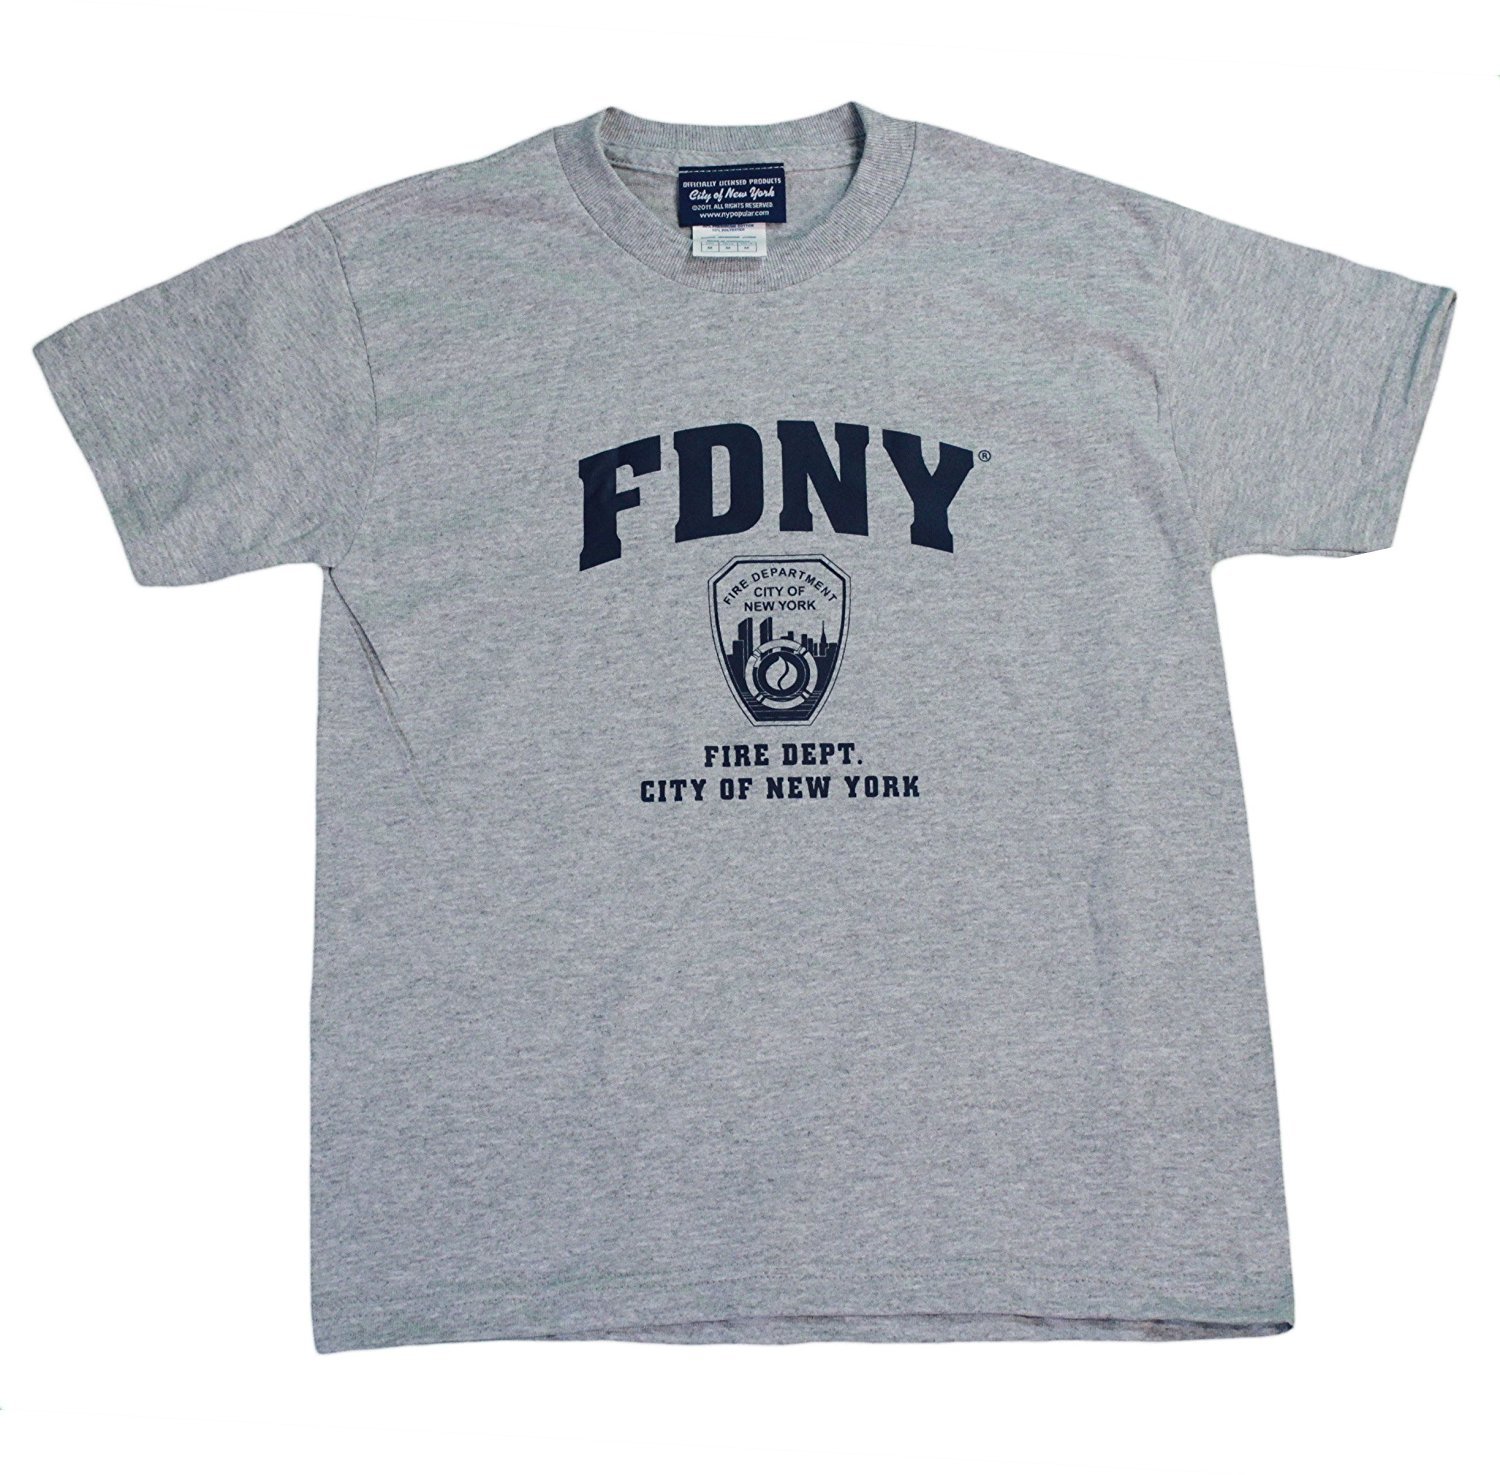 FDNY Kids T-Shirt Heather Gray Boys Youth Size Official Shirt